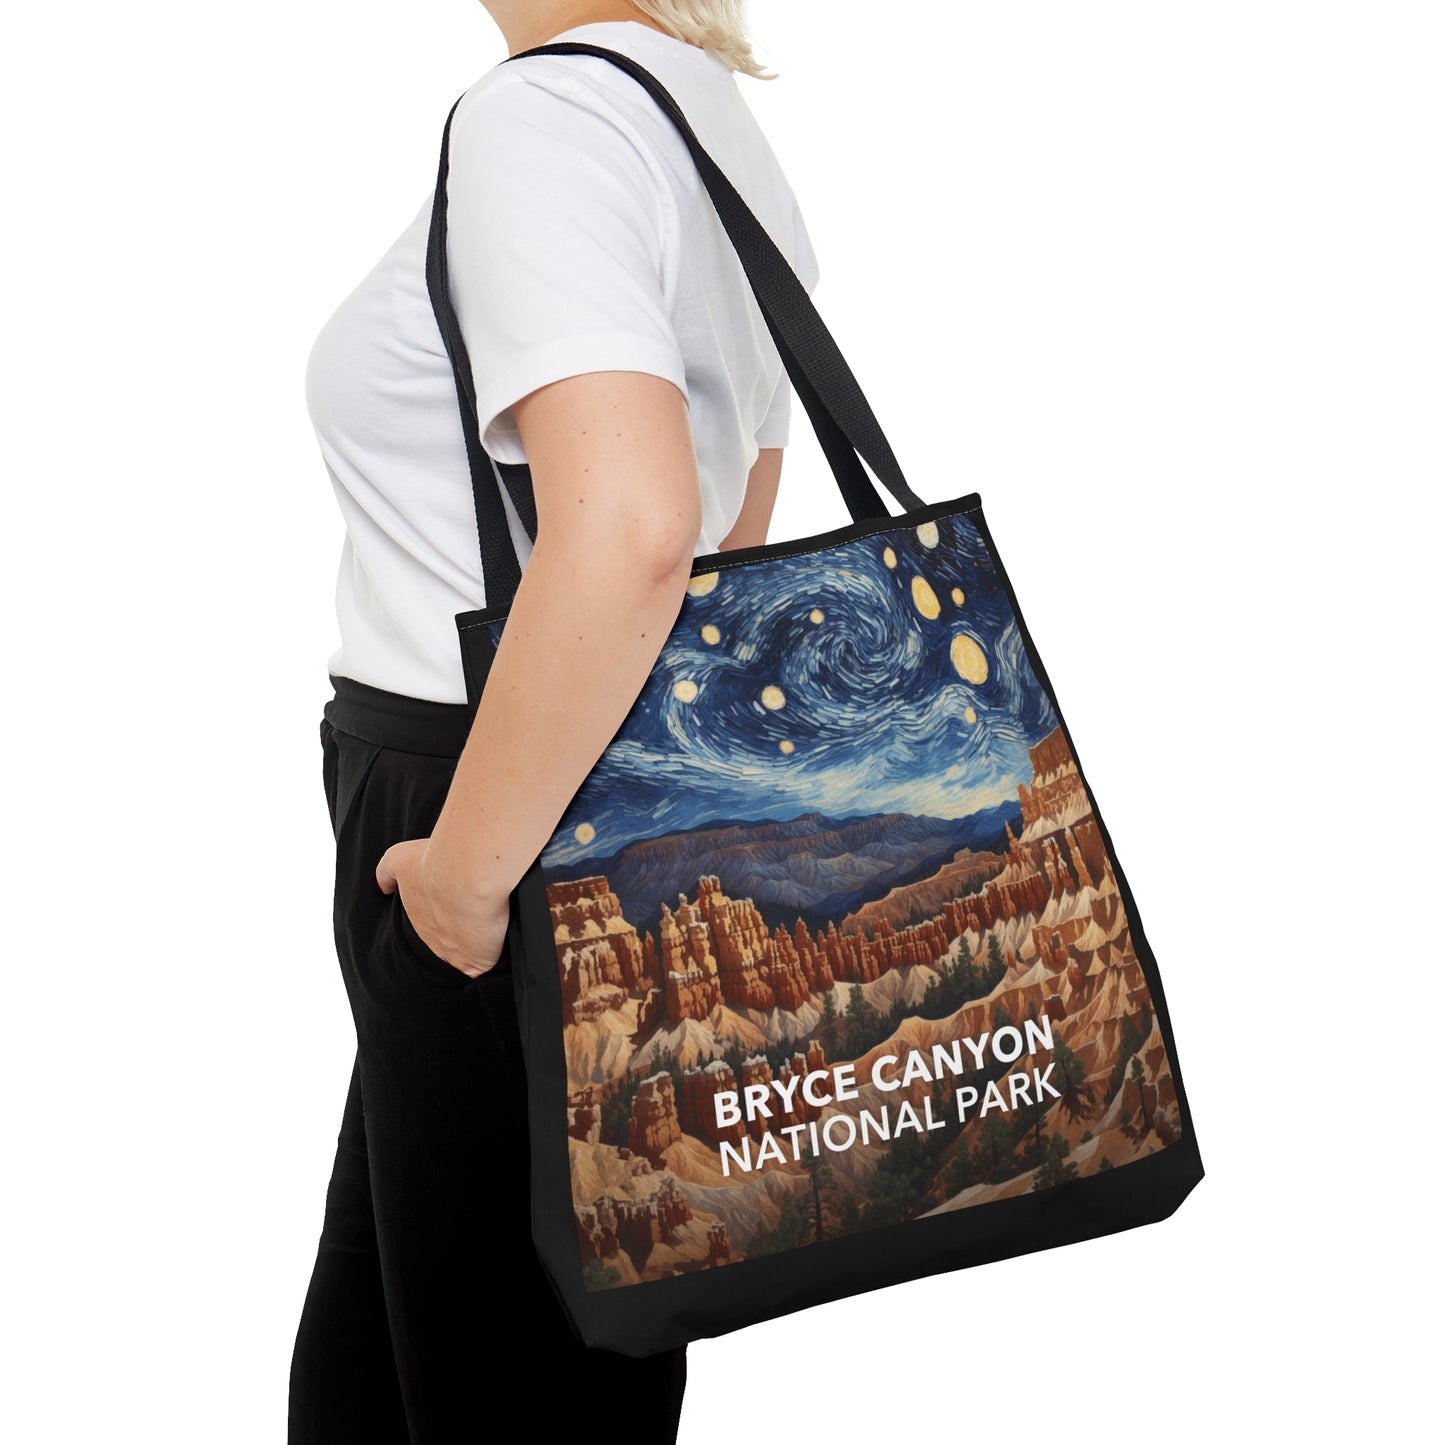 Bryce Canyon National Park Tote Bag - The Starry Night